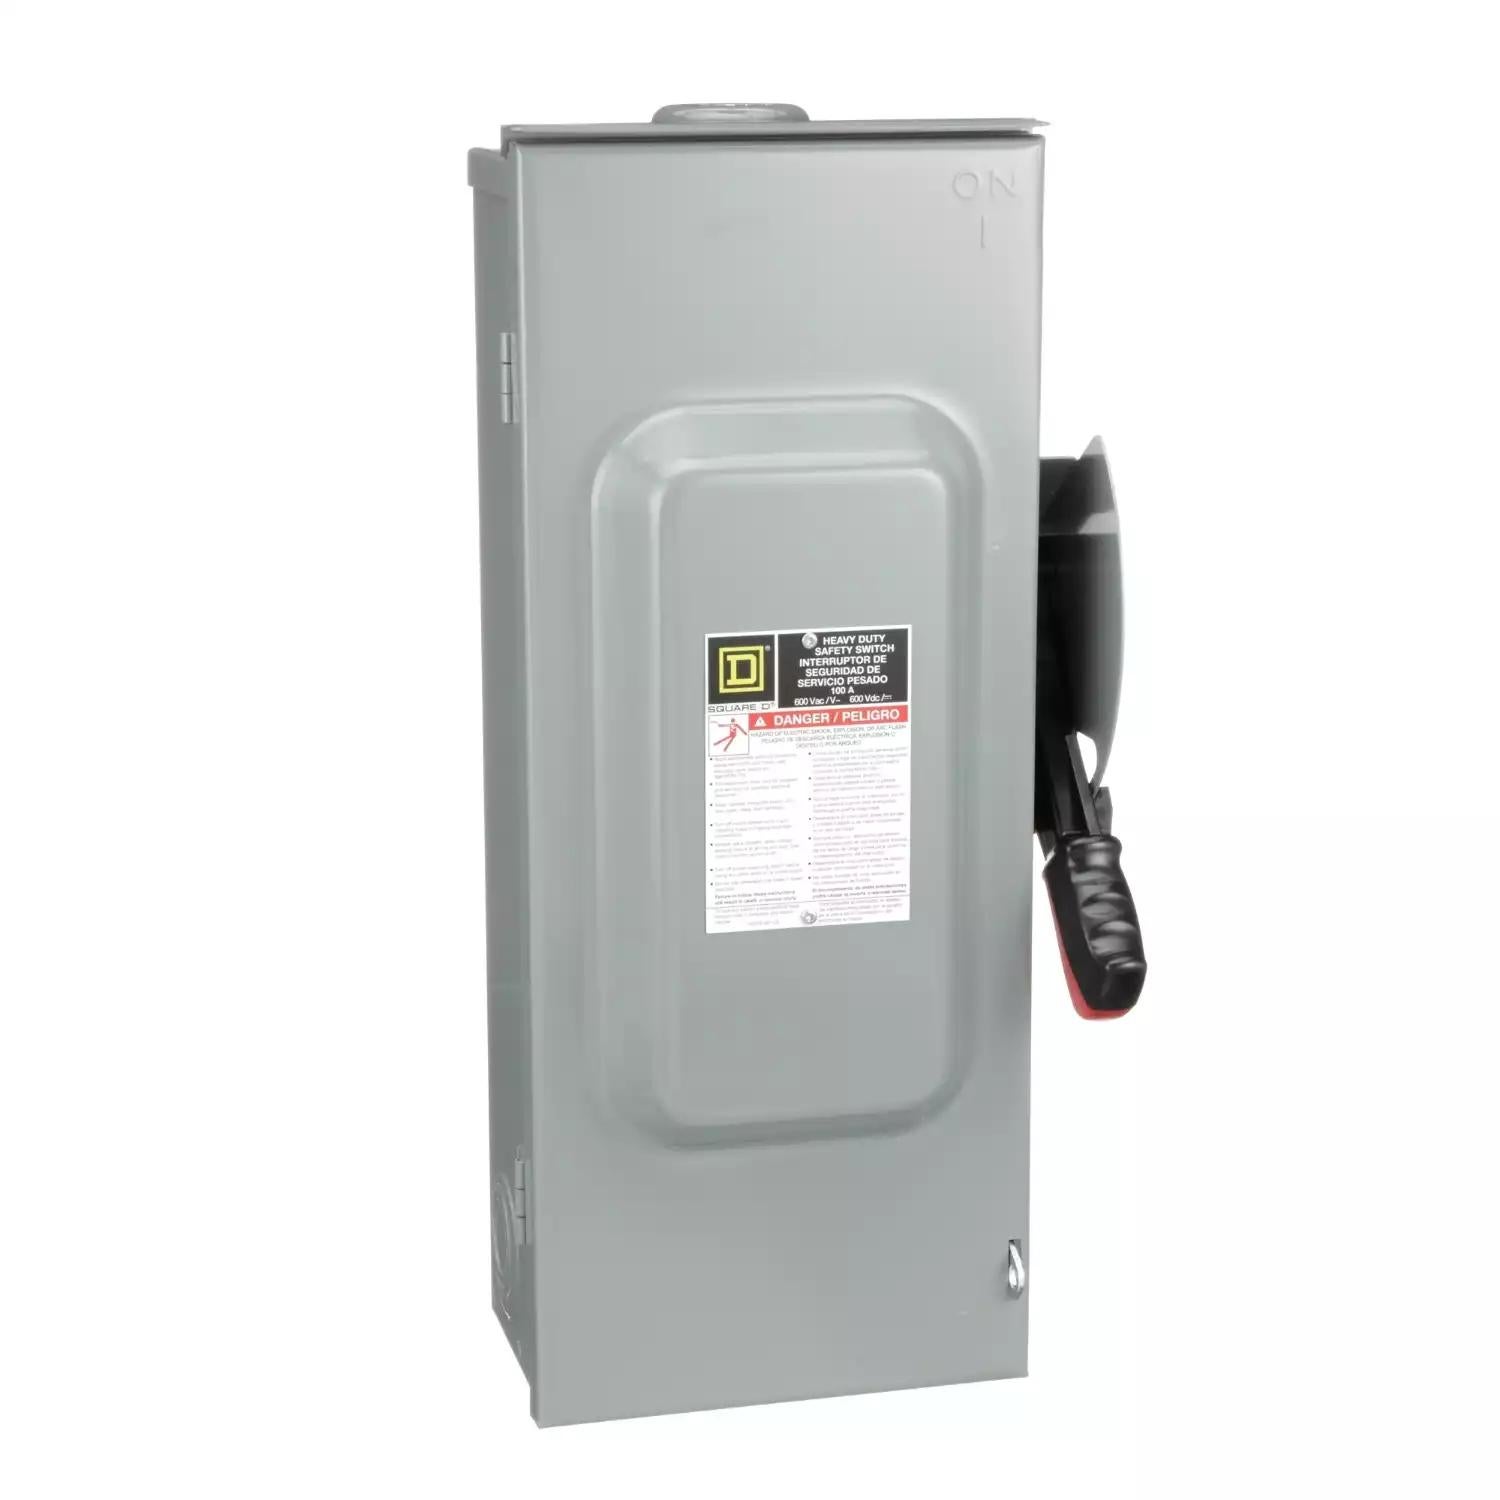 Safety switch, heavy duty, fusible, 100A, 3 wire, 3 poles, 100hp, 600VAC/DC, Type 3R, bolt on hub provision